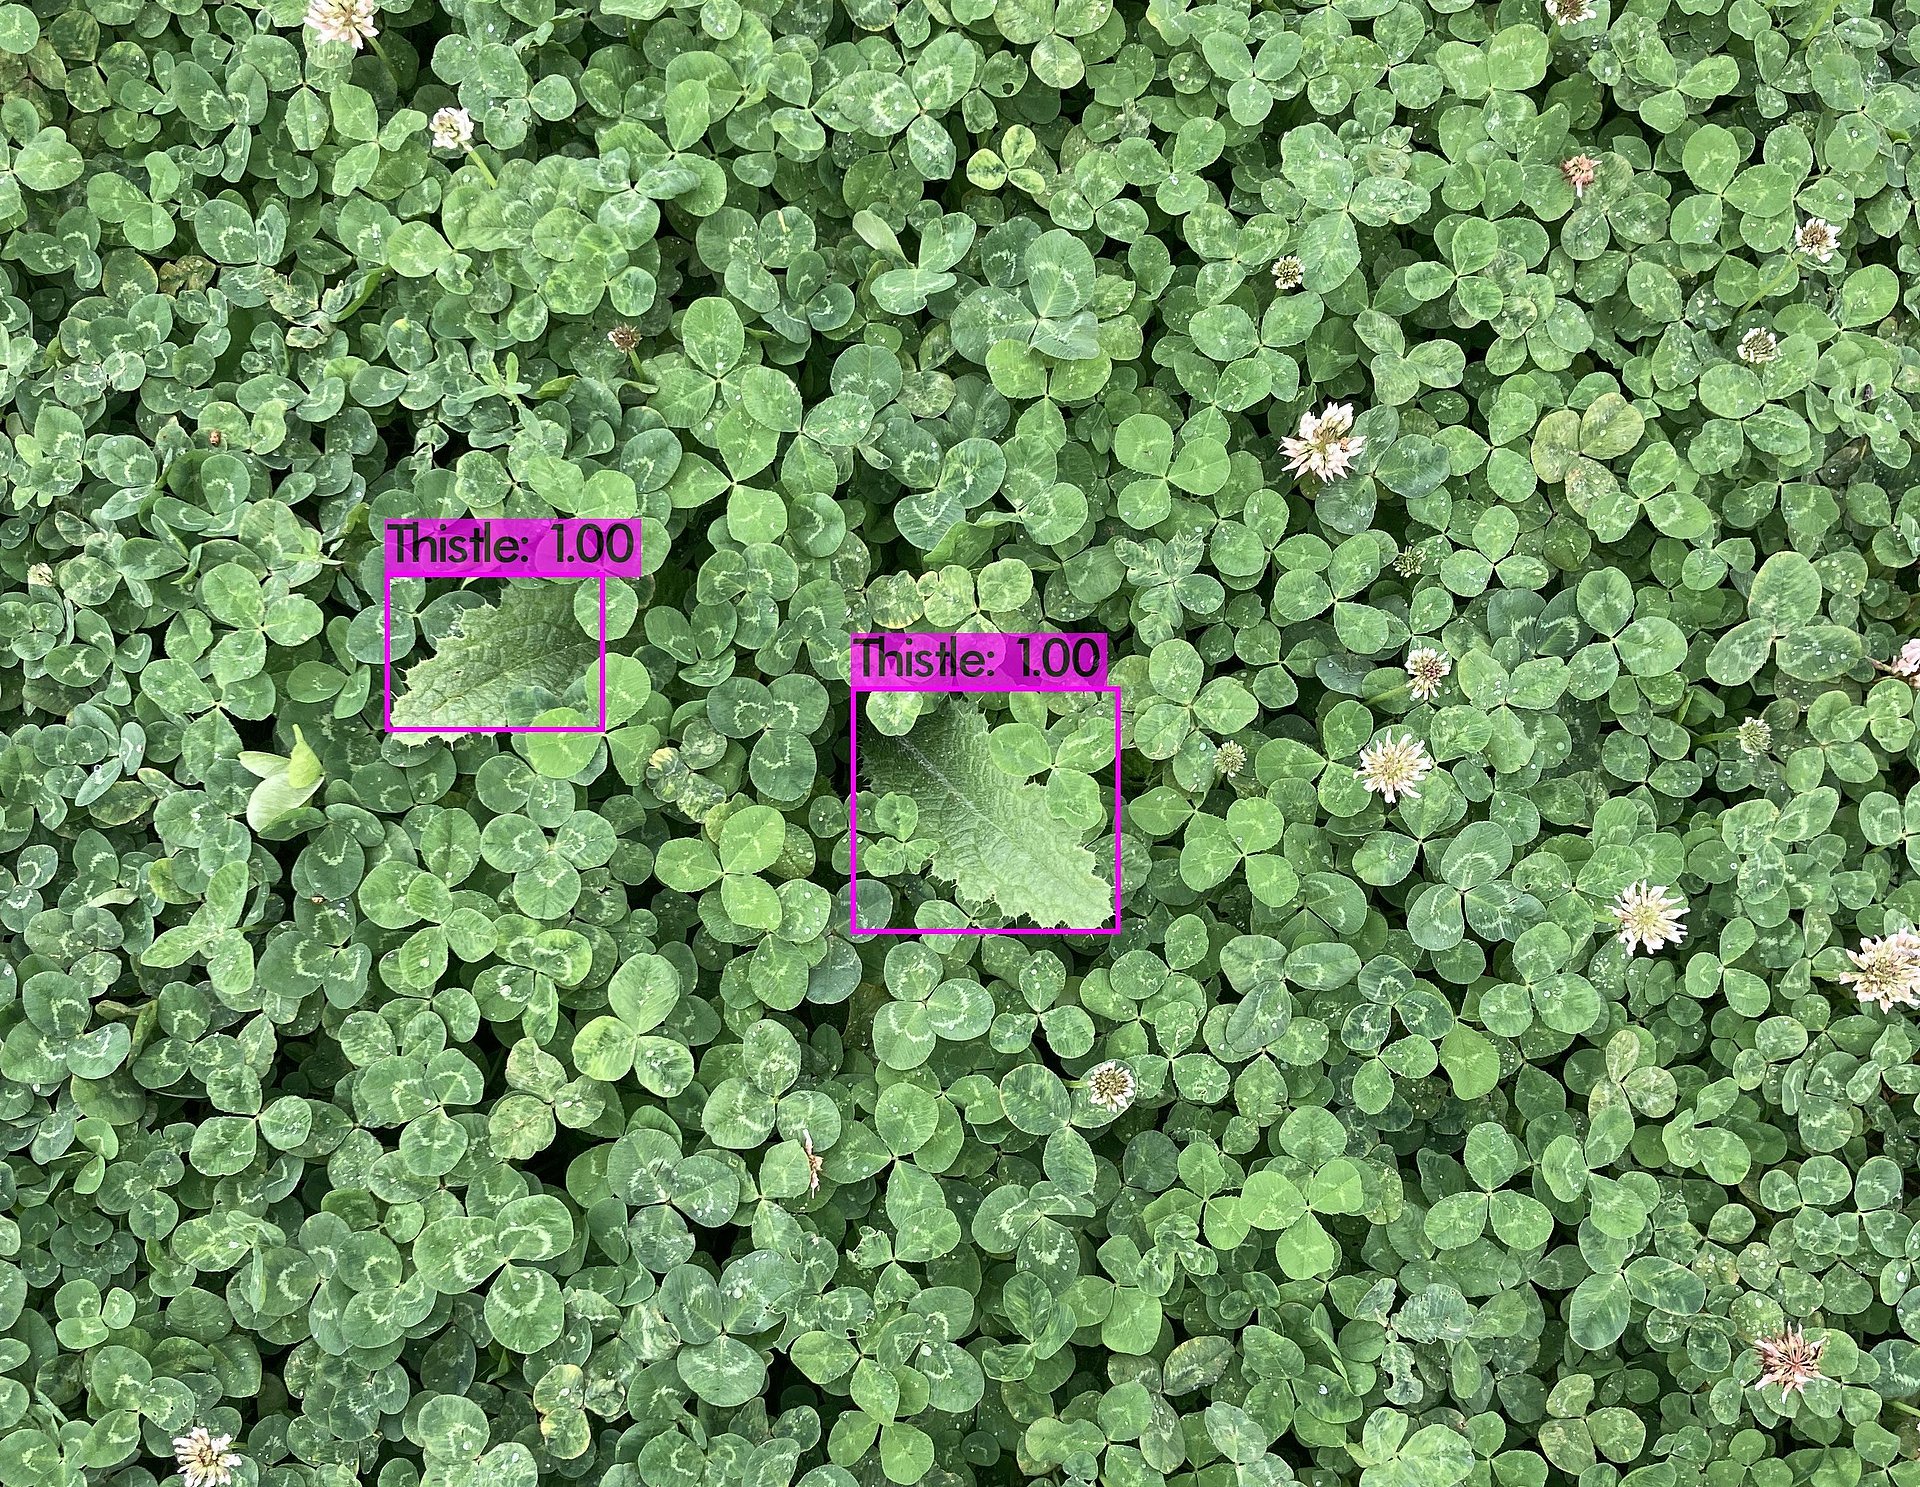 The software is able to differ between thistles (violet marks) and clover on recordings of the camera drone.